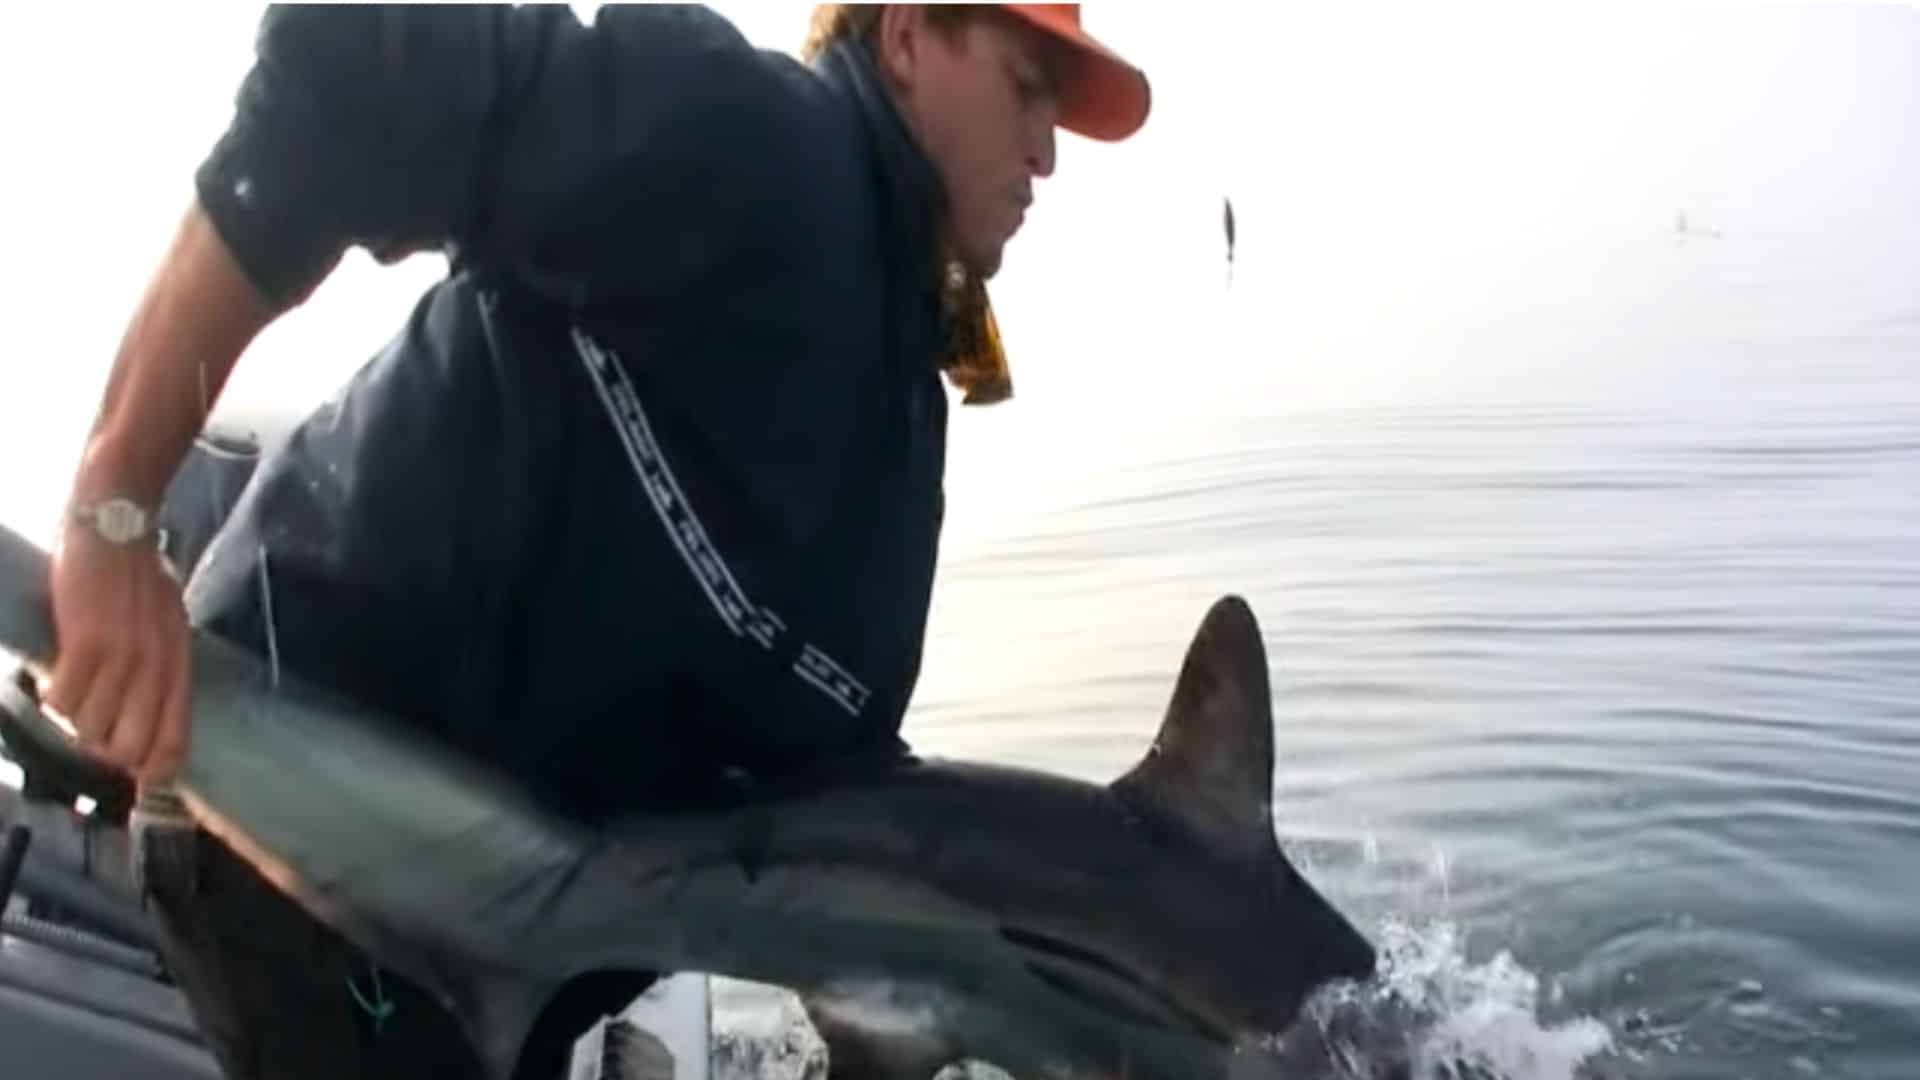 fisherman falls overboard with shark